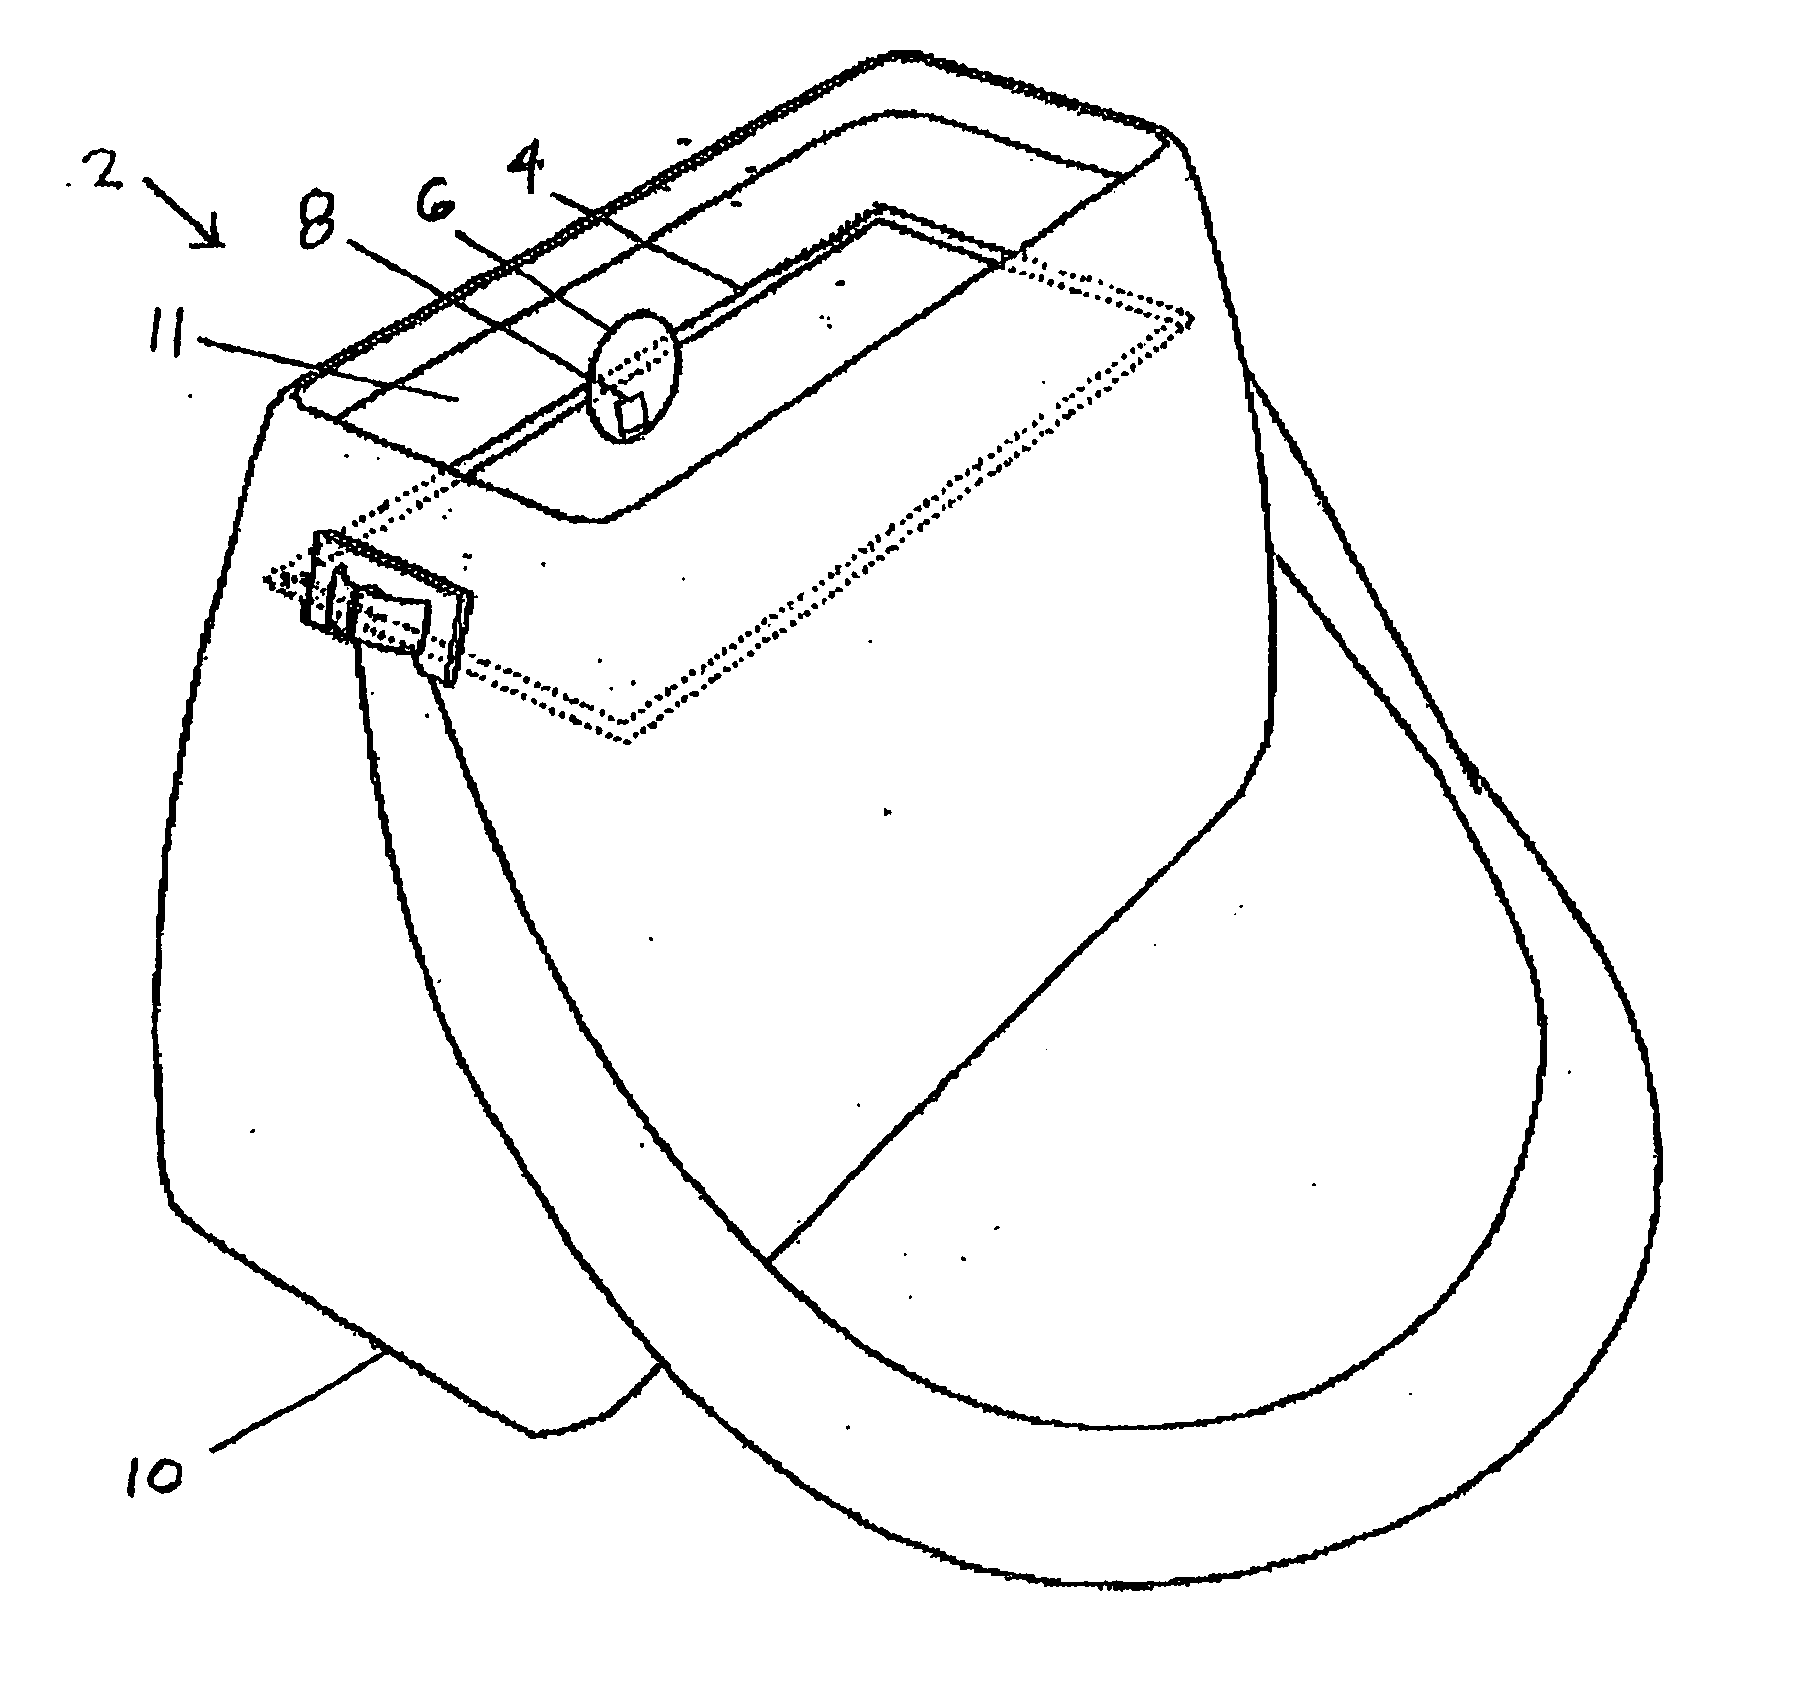 Lighting system for an interior of a clothing accessory or an article of clothing and a method of manufacture thereof